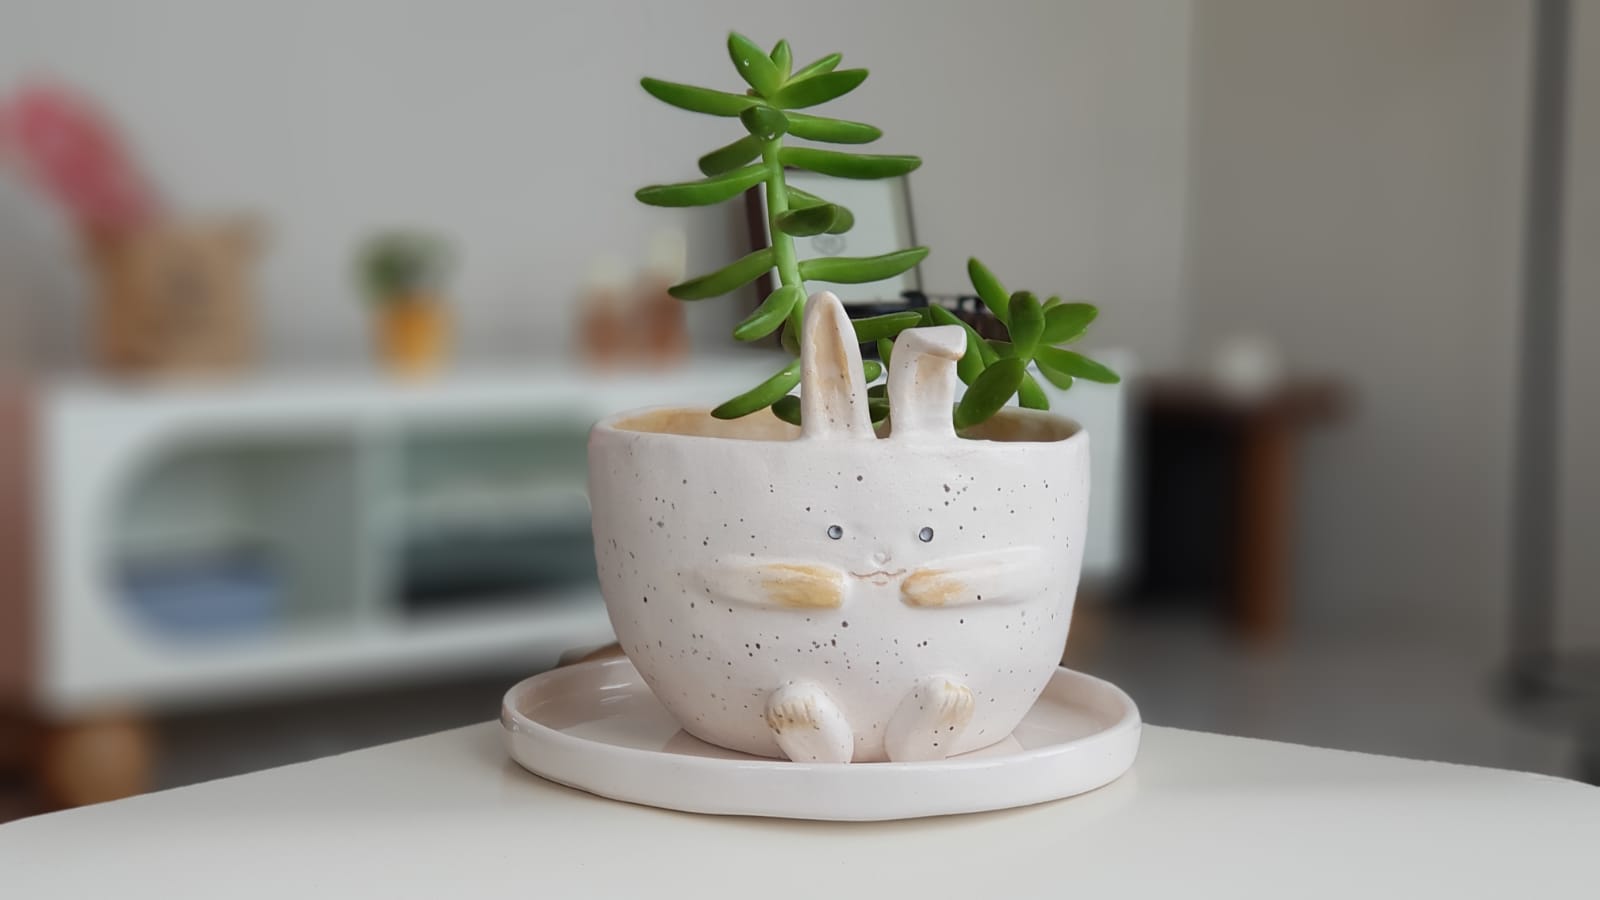 Handcrafted ceramic planter with bunny ears cradling a green succulent.